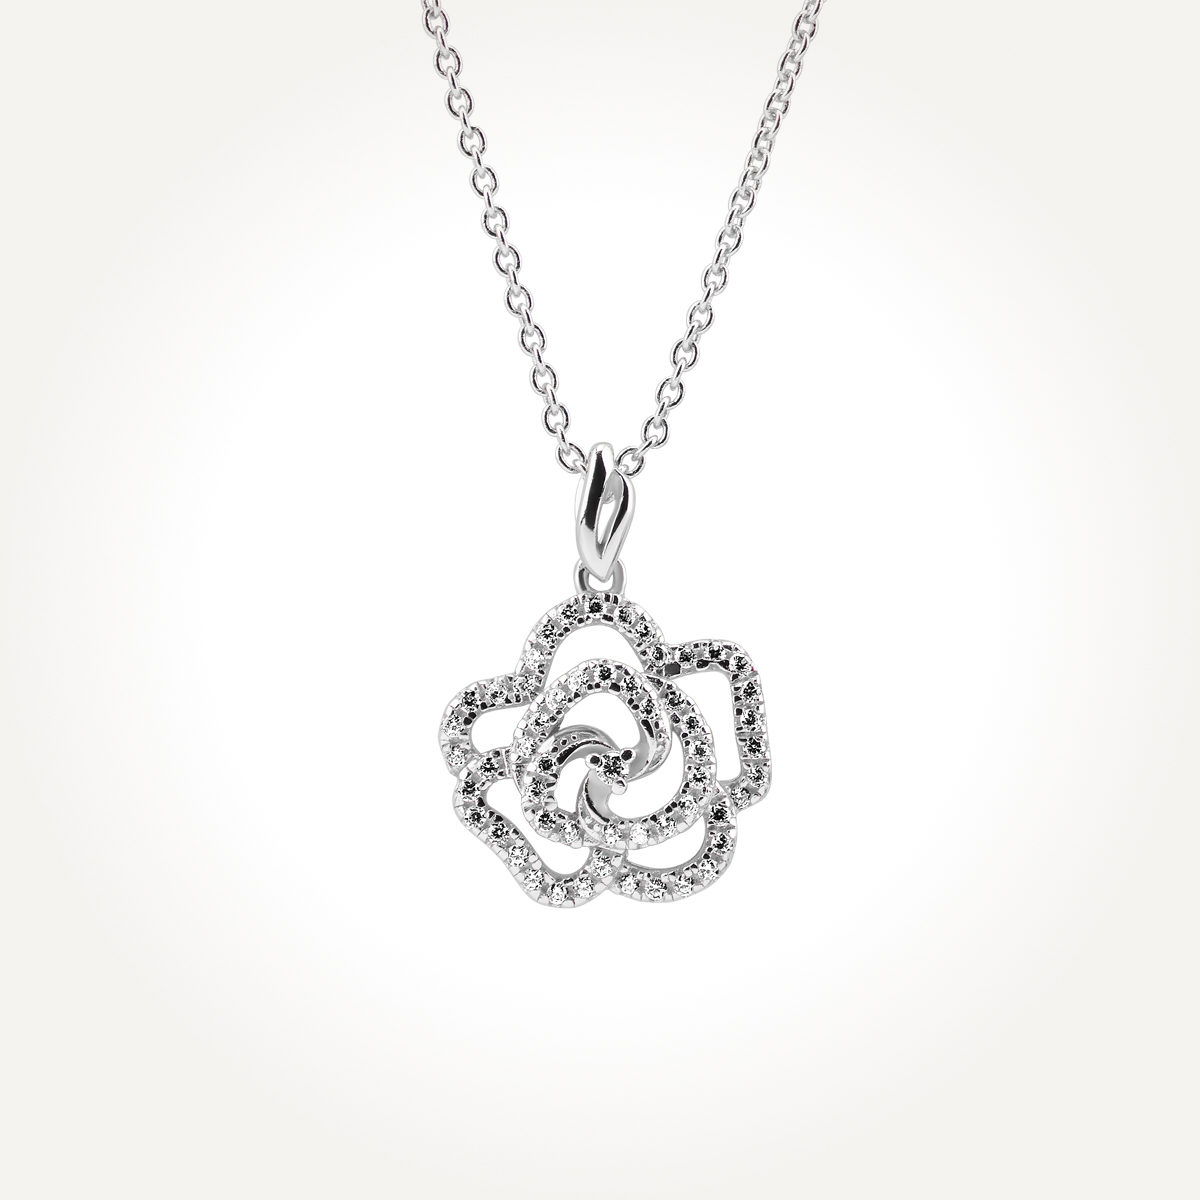 14KT White Gold Camelia Necklace 0.17 CT. T.W.